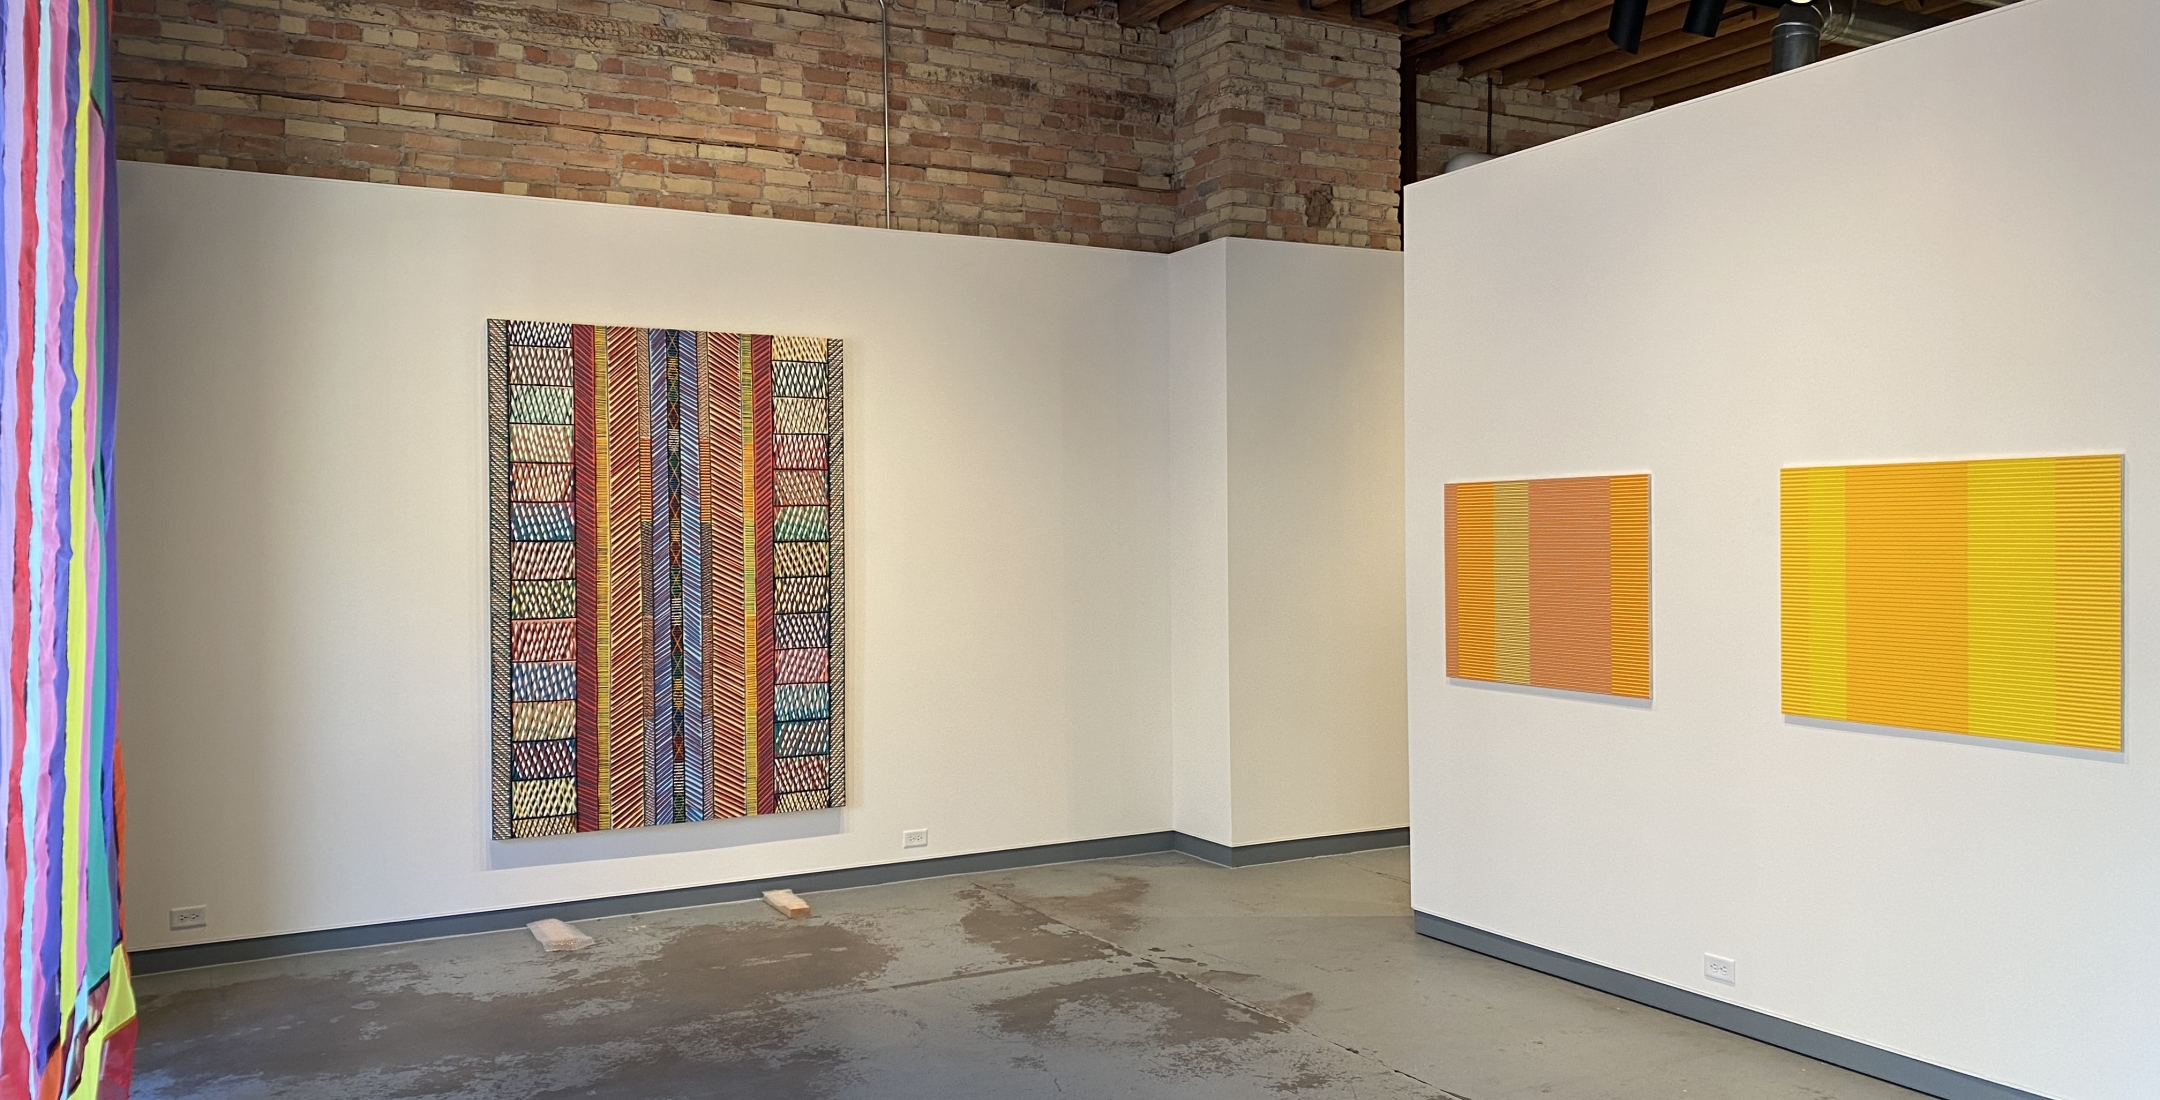 Ongoing exhibition - installation view - Rachel Hayes (left), Marcus Cain (center), Matthew Kluber (right)